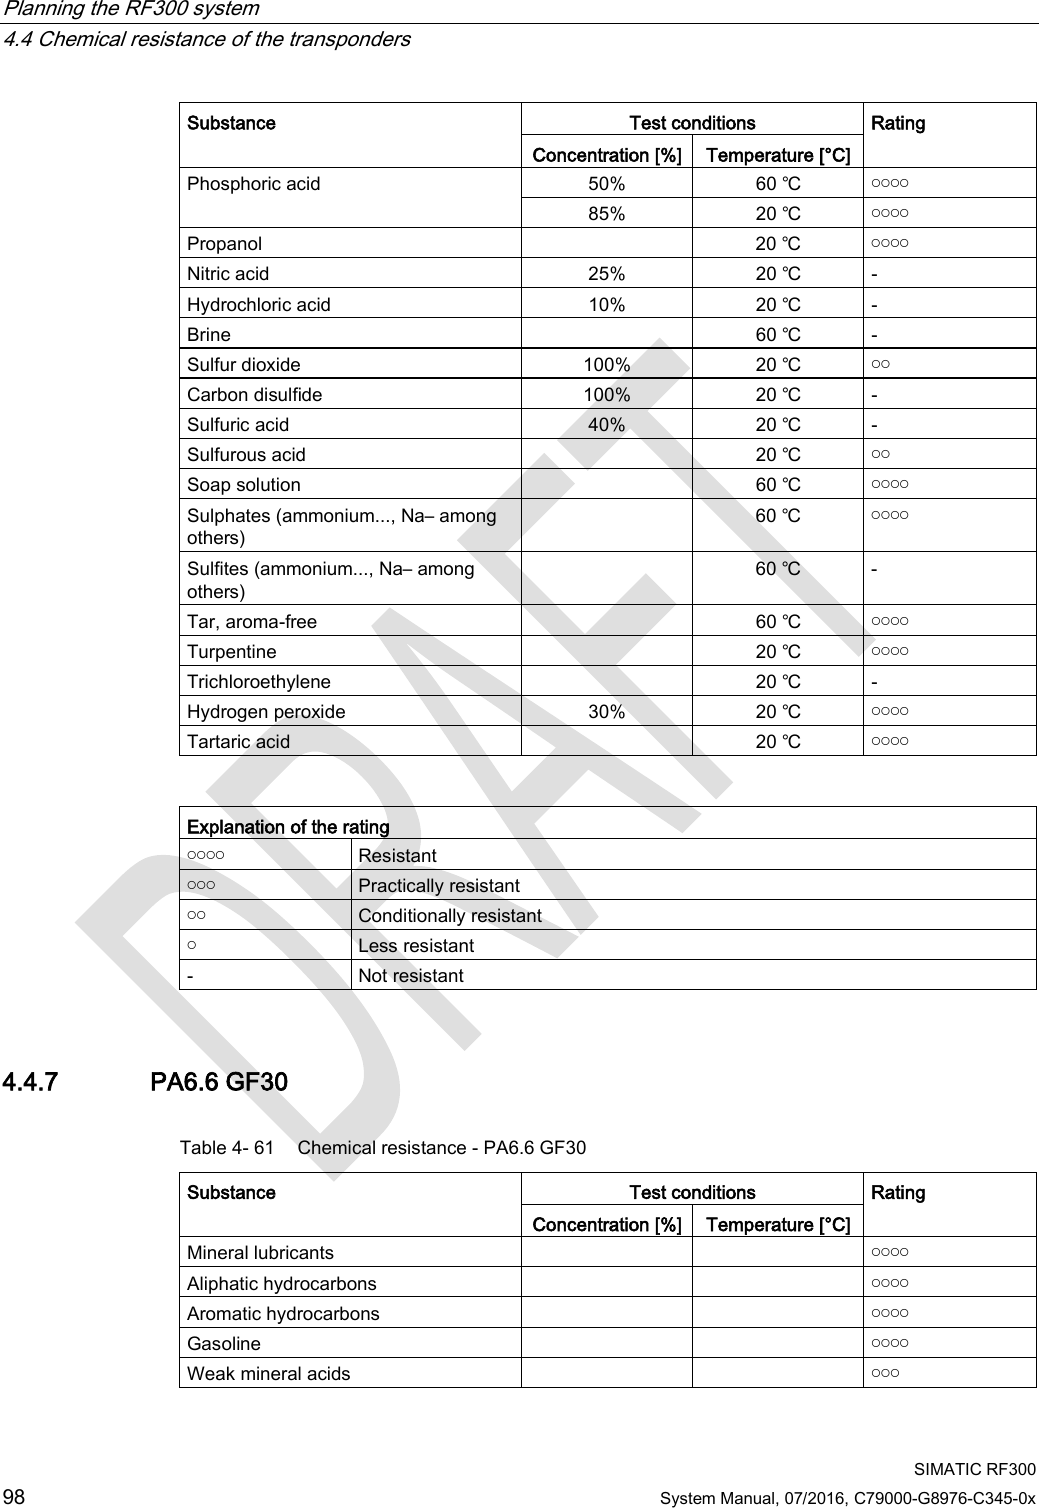 Planning the RF300 system   4.4 Chemical resistance of the transponders  SIMATIC RF300 98 System Manual, 07/2016, C79000-G8976-C345-0x Substance Test conditions Rating Concentration [%] Temperature [°C] Phosphoric acid 50% 60 ℃ ￮￮￮￮ 85% 20 ℃ ￮￮￮￮ Propanol    20 ℃ ￮￮￮￮ Nitric acid 25% 20 ℃ - Hydrochloric acid 10% 20 ℃ - Brine  60 ℃ - Sulfur dioxide 100% 20 ℃ ￮￮ Carbon disulfide 100% 20 ℃ - Sulfuric acid 40% 20 ℃ - Sulfurous acid  20 ℃ ￮￮ Soap solution  60 ℃ ￮￮￮￮ Sulphates (ammonium..., Na– among others)  60 ℃ ￮￮￮￮ Sulfites (ammonium..., Na– among others)  60 ℃  - Tar, aroma-free  60 ℃ ￮￮￮￮ Turpentine  20 ℃ ￮￮￮￮ Trichloroethylene  20 ℃ - Hydrogen peroxide 30% 20 ℃ ￮￮￮￮ Tartaric acid  20 ℃ ￮￮￮￮   Explanation of the rating ￮￮￮￮ Resistant ￮￮￮ Practically resistant ￮￮ Conditionally resistant ￮ Less resistant - Not resistant 4.4.7 PA6.6 GF30 Table 4- 61 Chemical resistance - PA6.6 GF30 Substance Test conditions Rating Concentration [%] Temperature [°C] Mineral lubricants   ￮￮￮￮ Aliphatic hydrocarbons   ￮￮￮￮ Aromatic hydrocarbons   ￮￮￮￮ Gasoline    ￮￮￮￮ Weak mineral acids   ￮￮￮ 